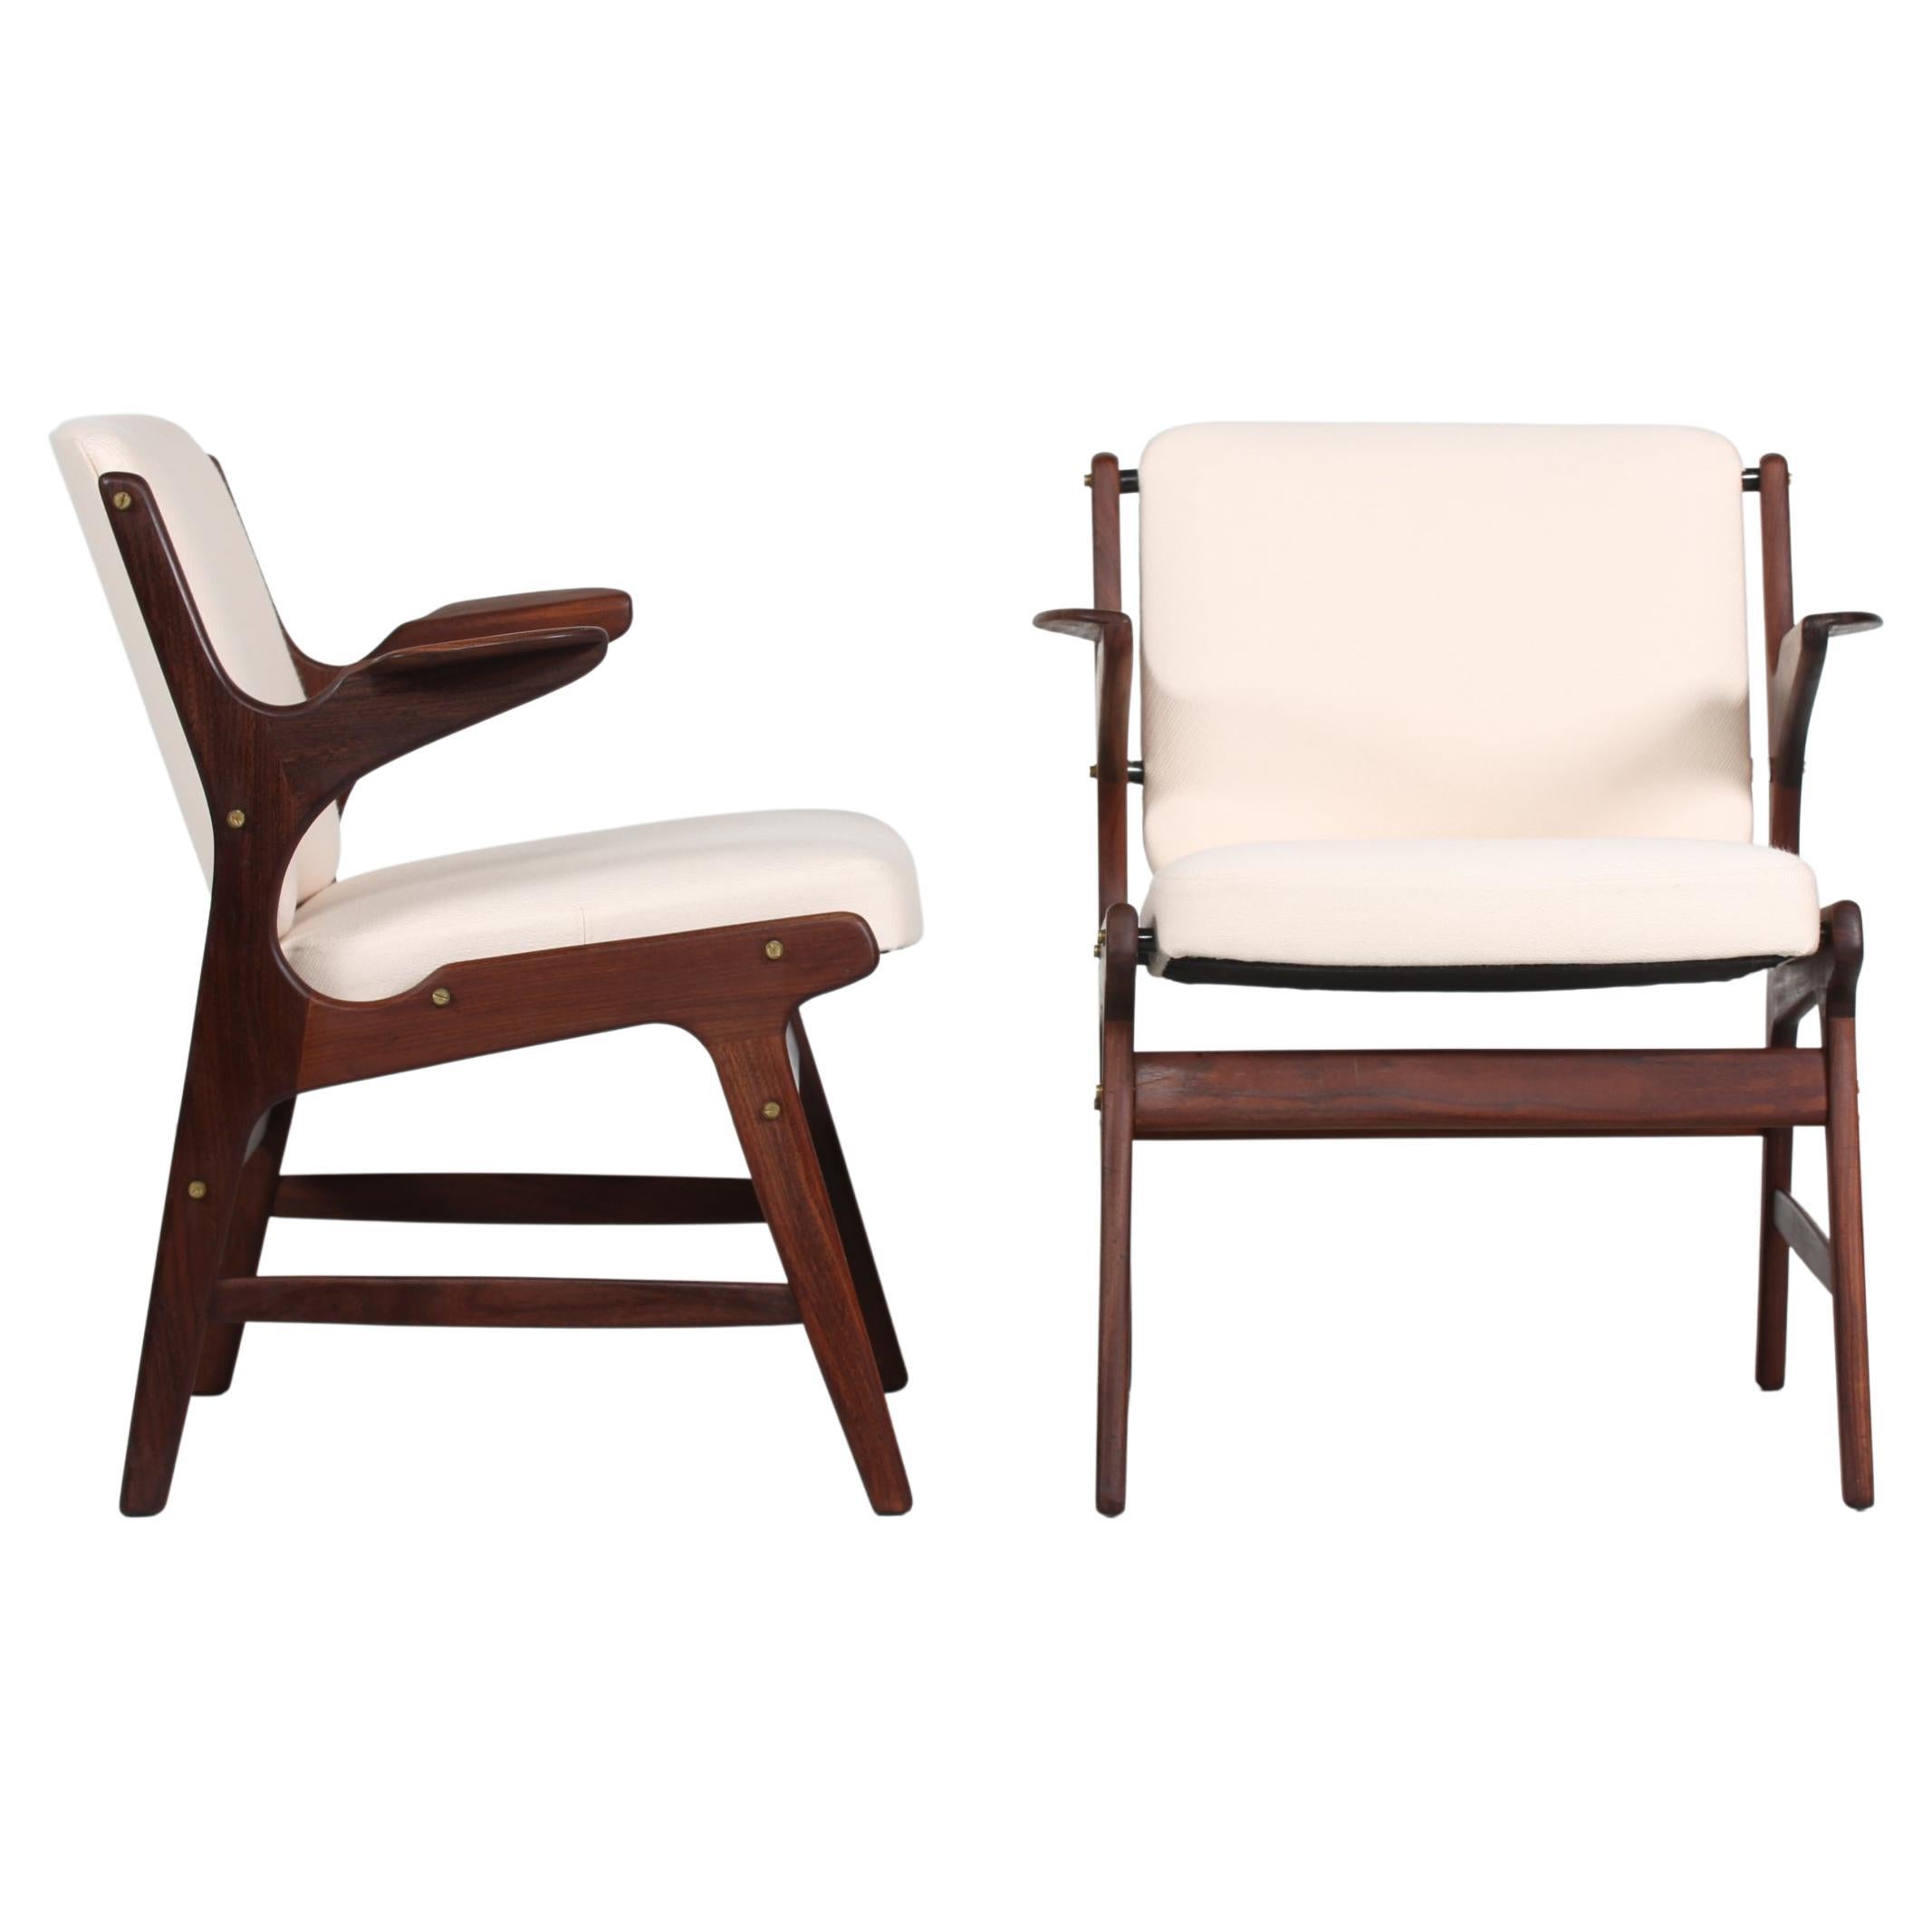 Arne Hovmand-Olsen Pair of Teak Armchairs with Light Colored Fabric Danish 60s For Sale